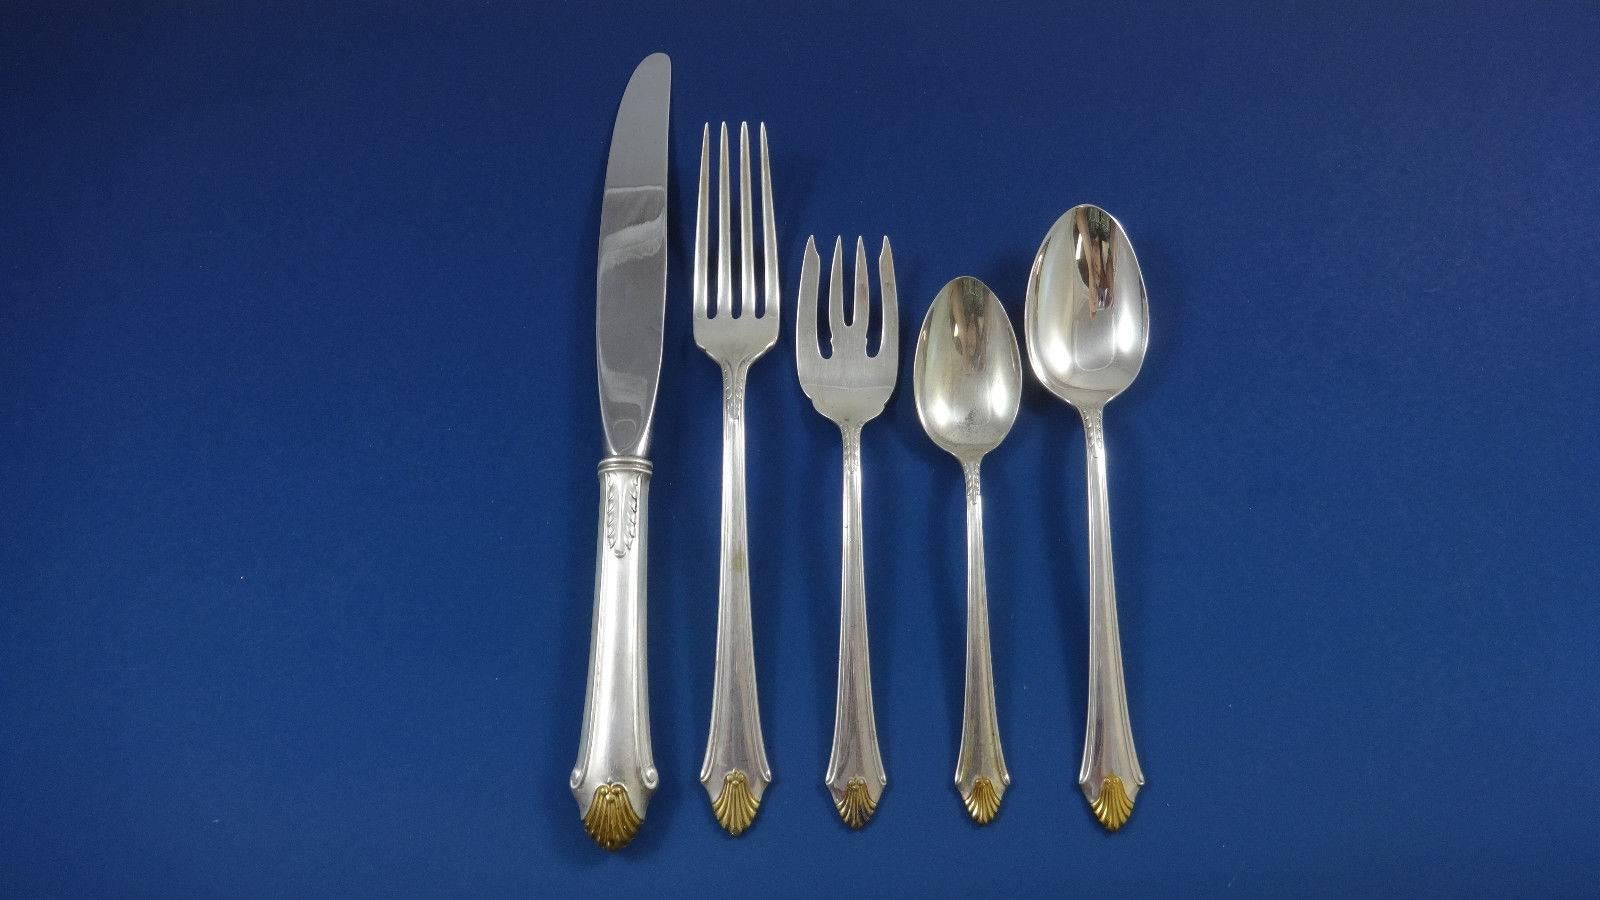 Originally issued in 1987, Edgemont Gold by Gorham has symmetrical flutes that adorn the end of the flatware, flaring in an unmistakable pattern.

Dinner size estate Edgemont Gold by Gorham sterling silver flatware set of 44 pieces. This set